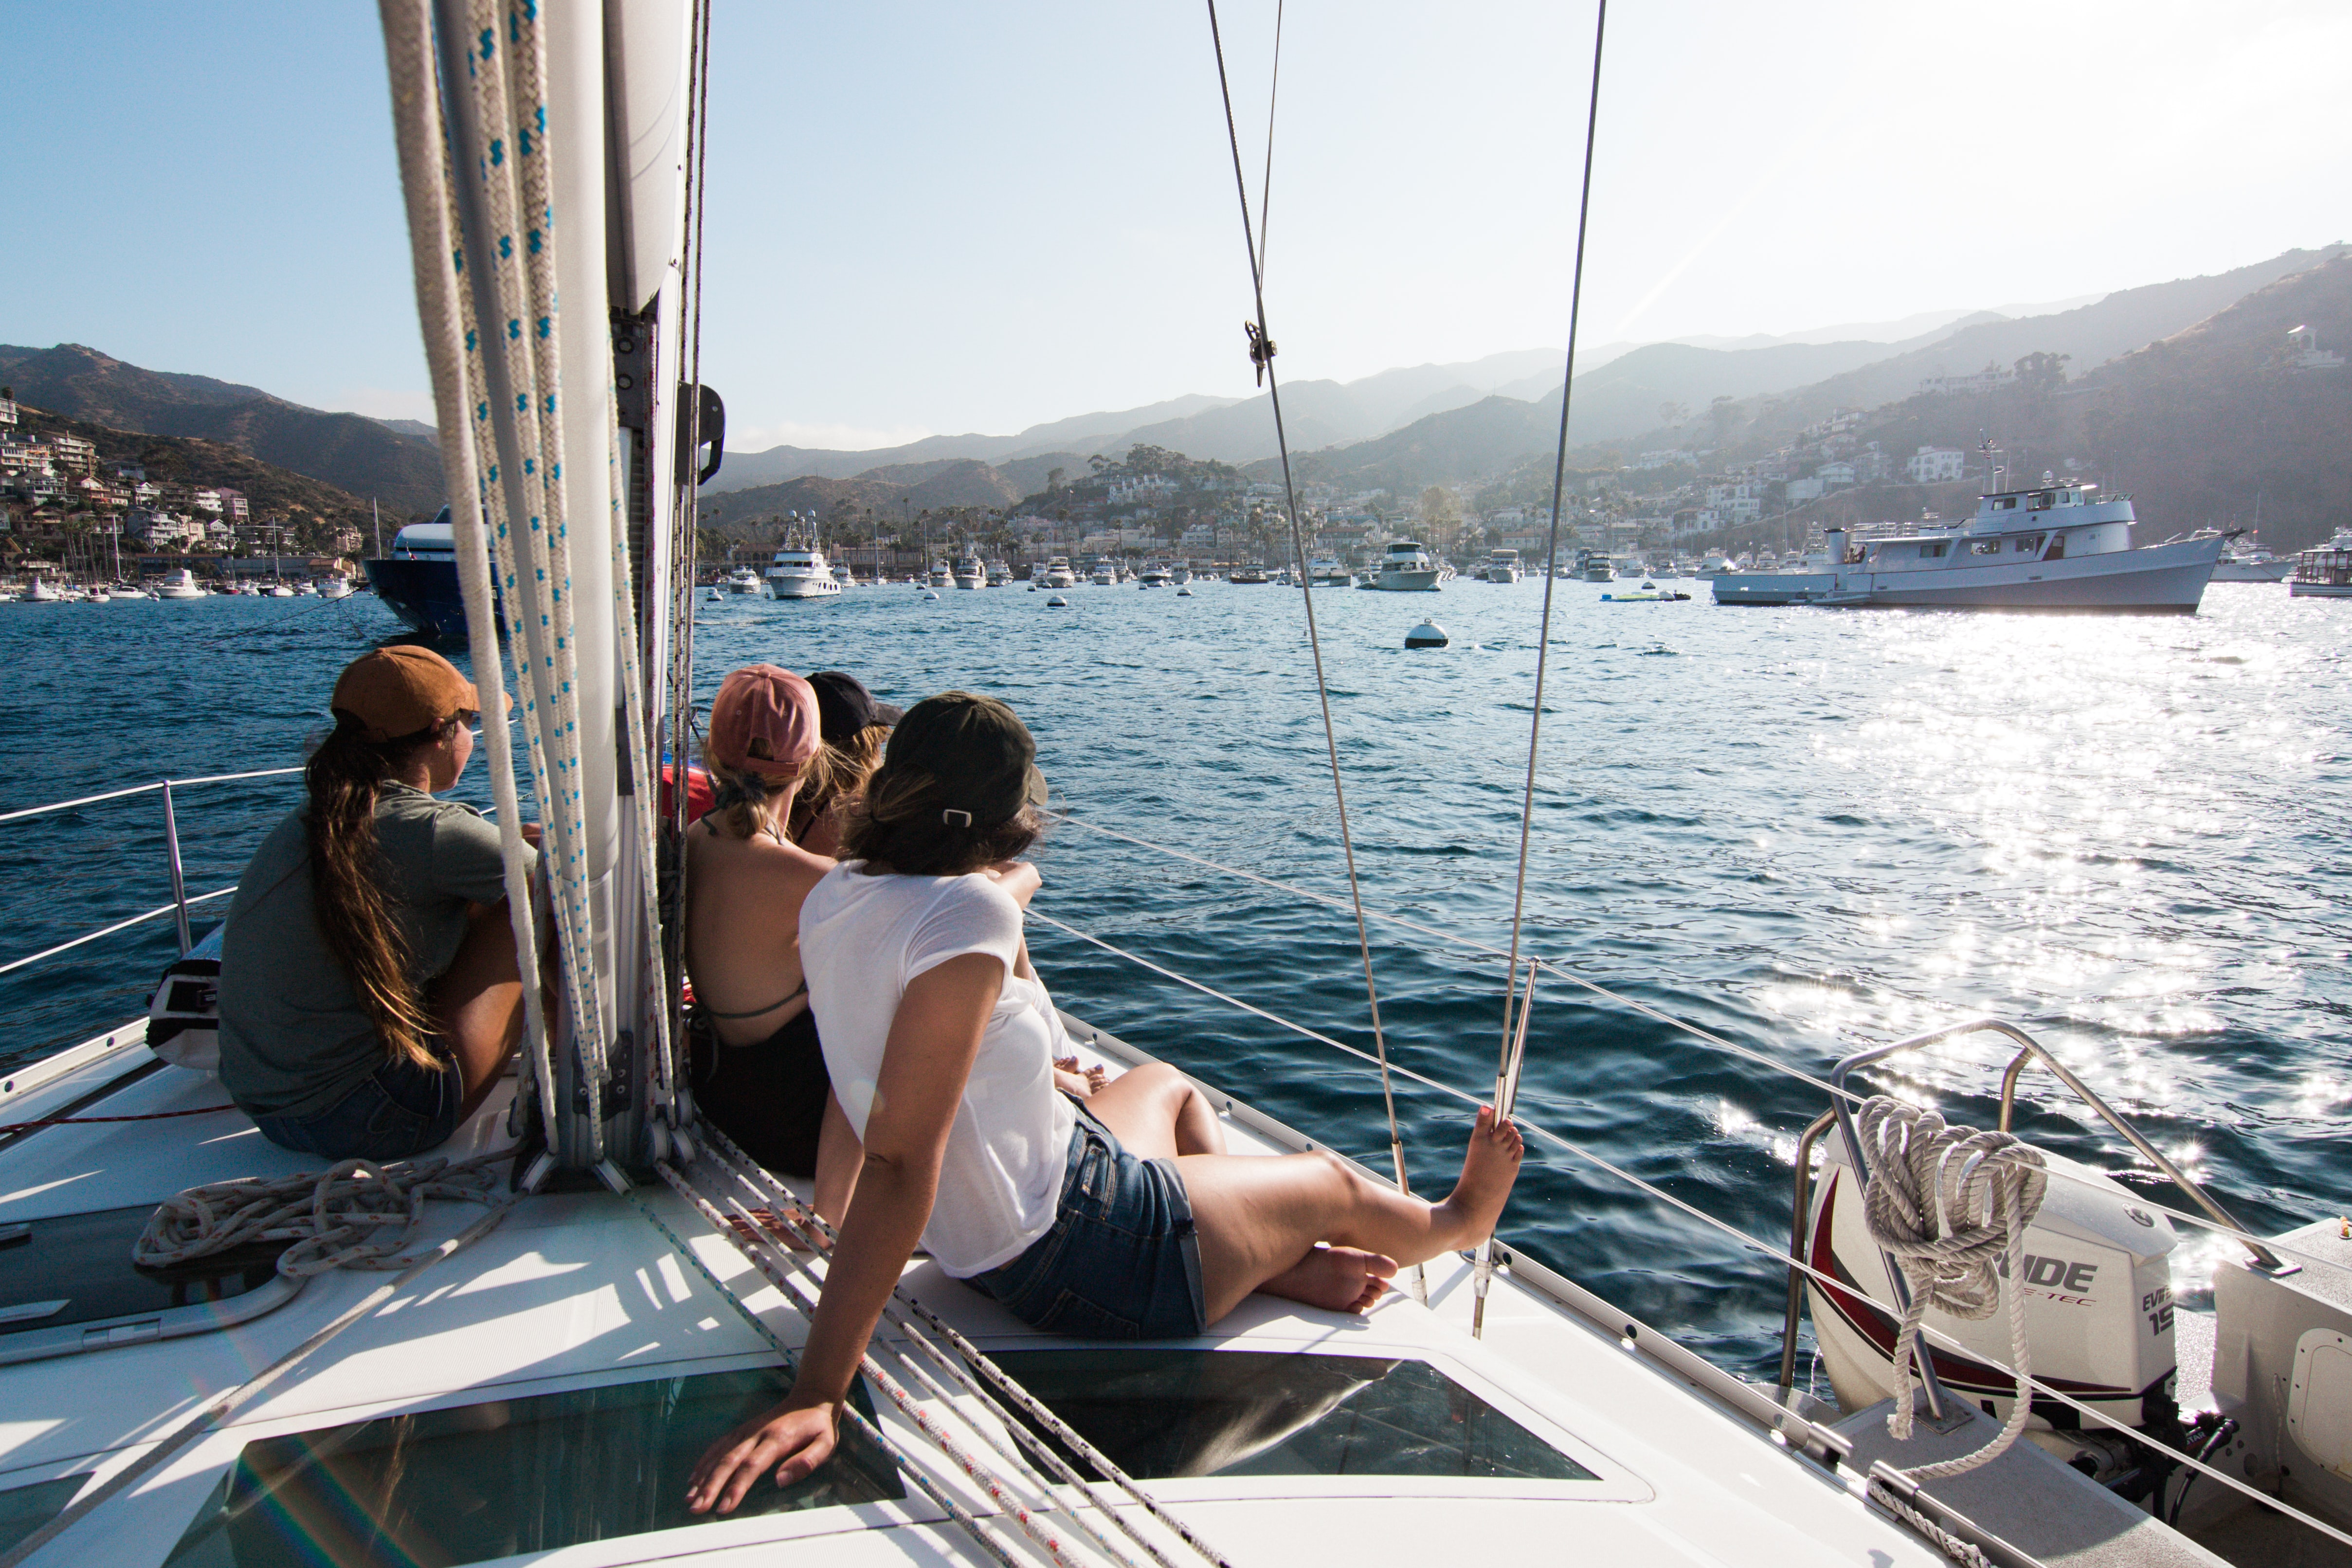 People relaxing on a sailboat in a mountainous scenery